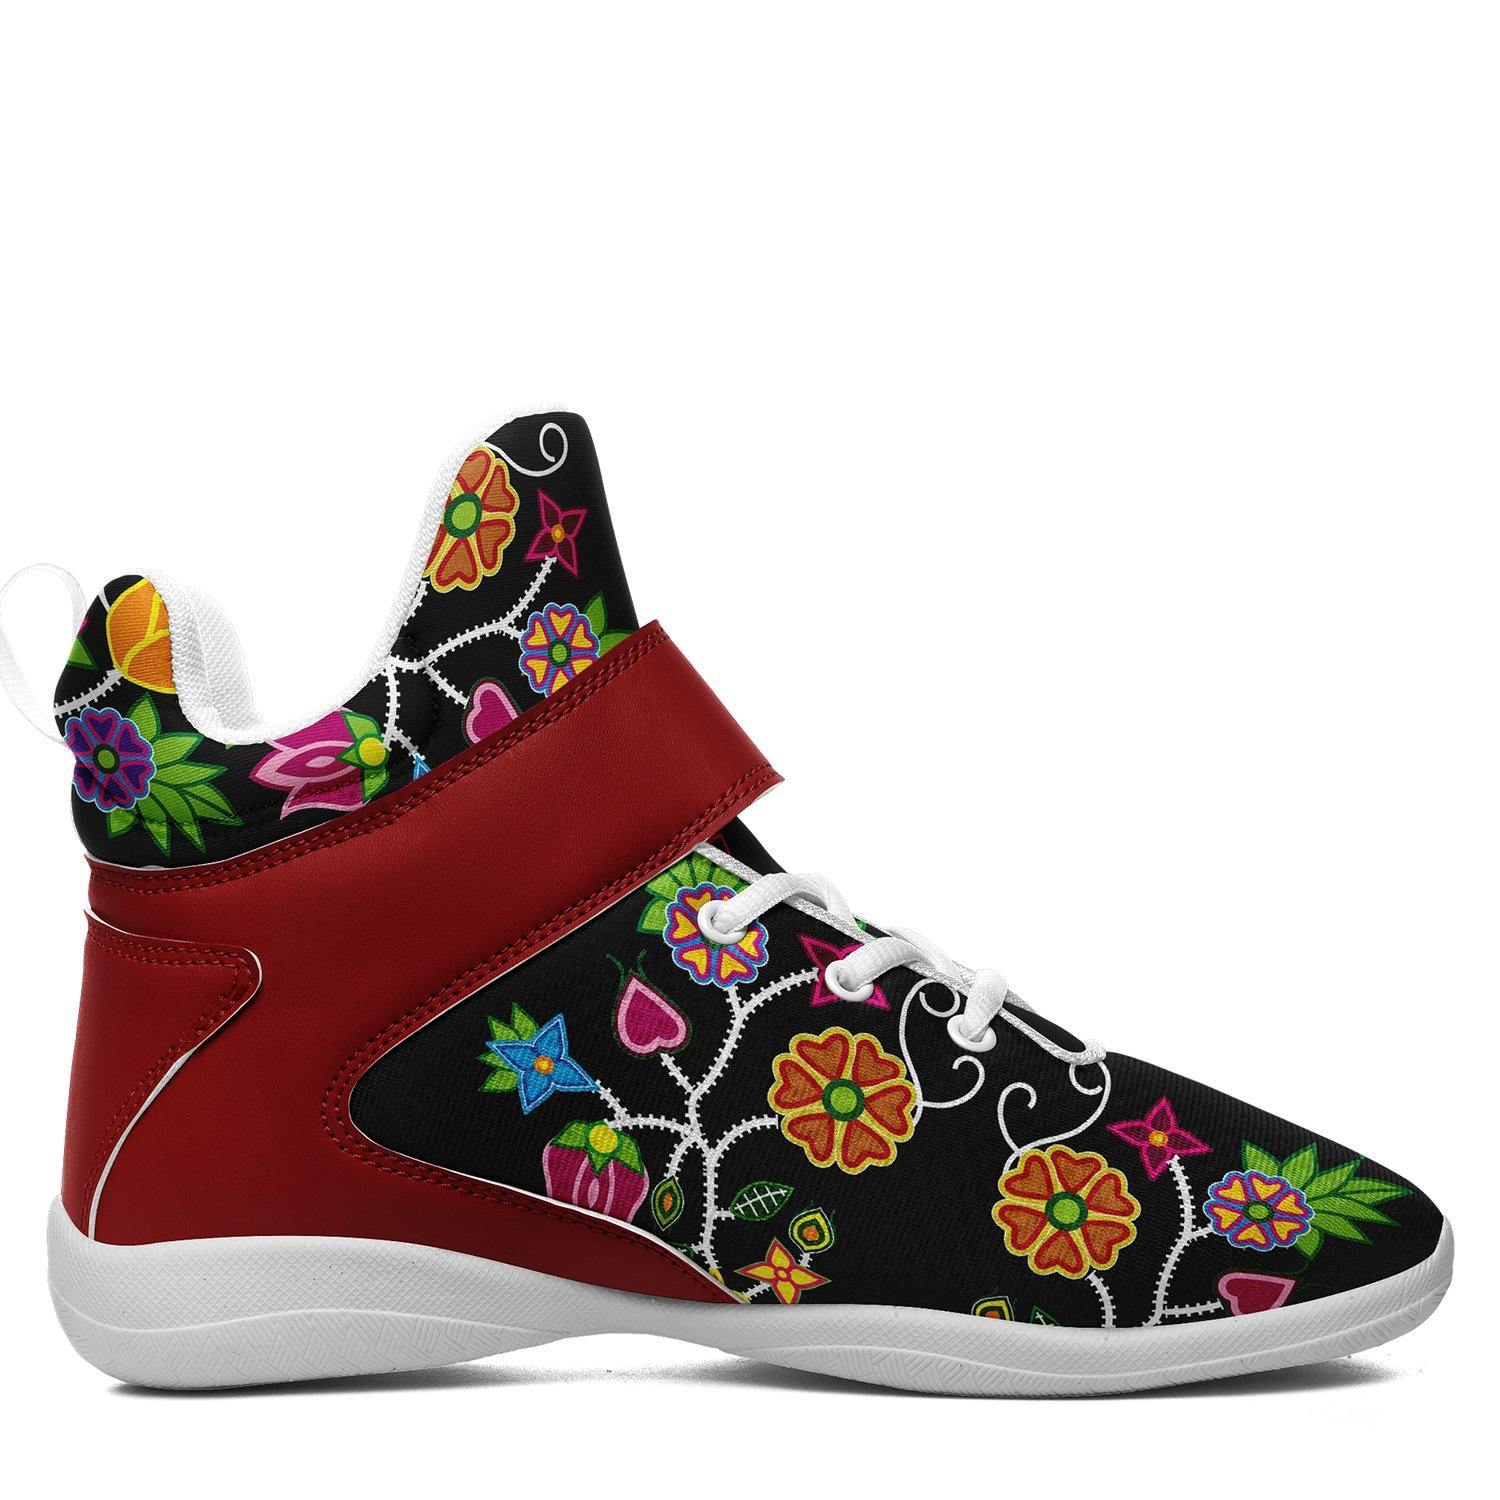 Floral Beadwork Ipottaa Basketball / Sport High Top Shoes - White Sole 49 Dzine 